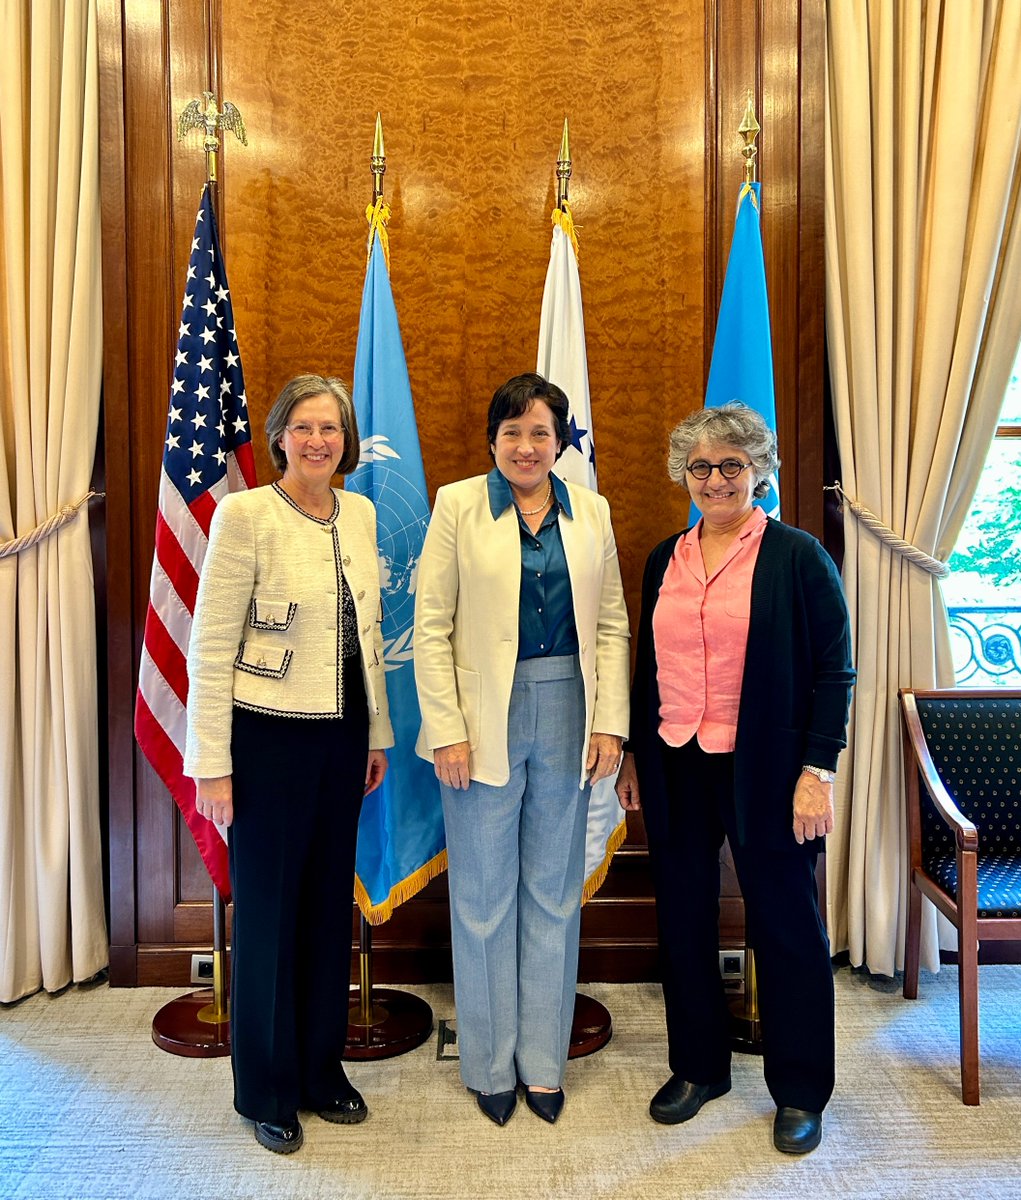 Very pleased to welcome Claudia Roda and Susan Perry from The American University of Paris – the newest 🇺🇸 University UNESCO Chair in Artificial Intelligence and Human Rights. Thrilled to have your expertise at @UNESCO for #AIforGood at such a critical moment.